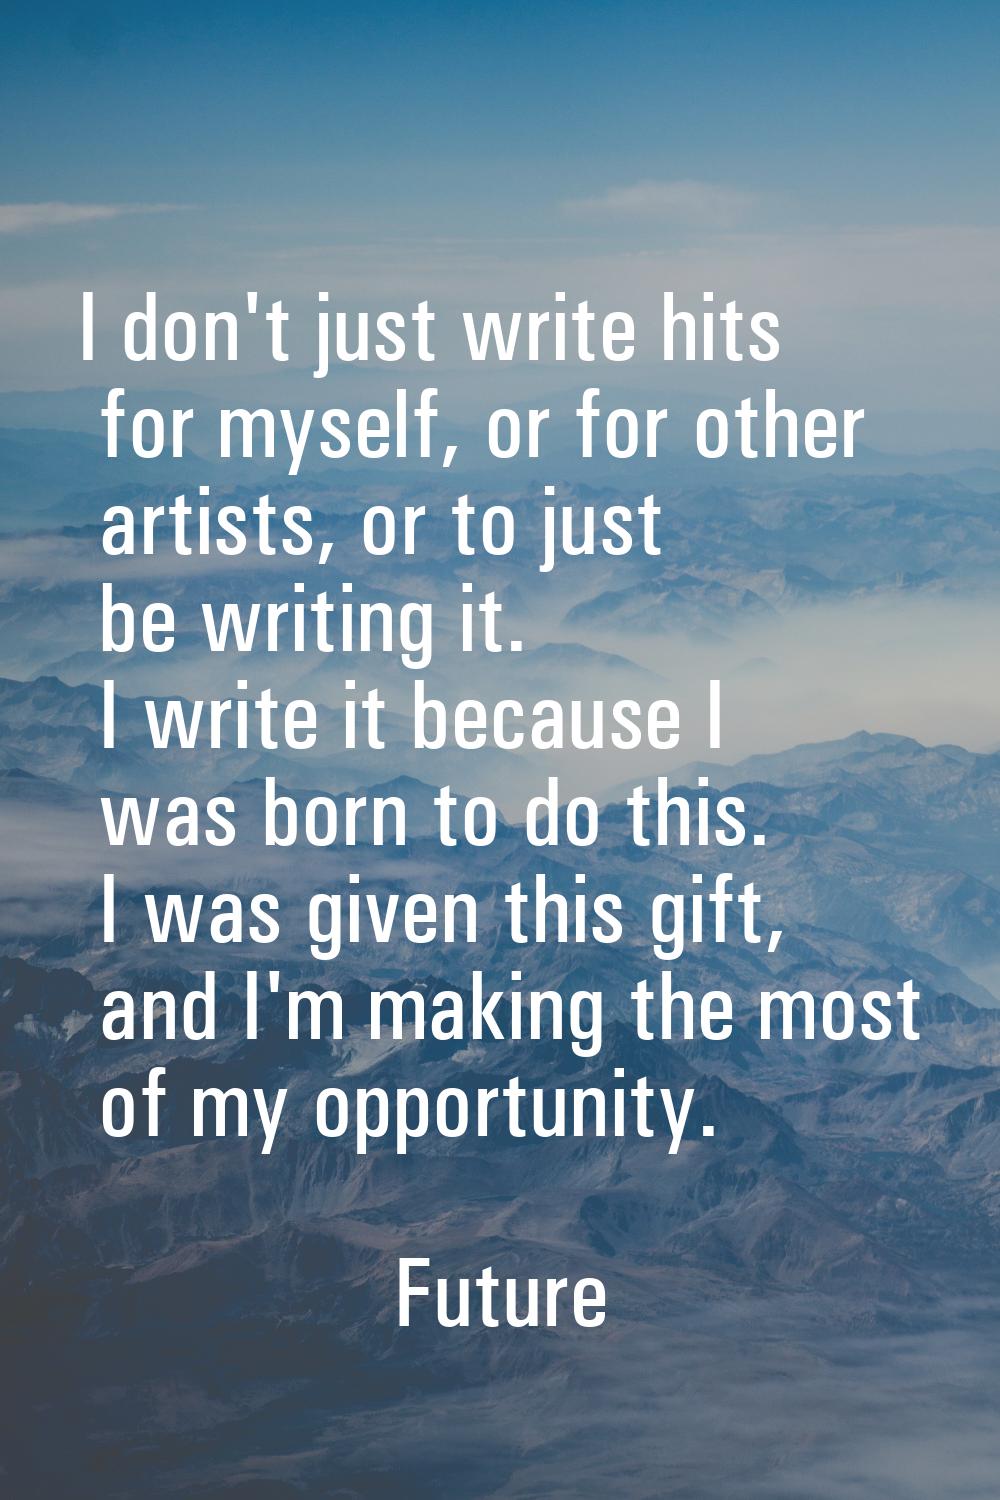 I don't just write hits for myself, or for other artists, or to just be writing it. I write it beca